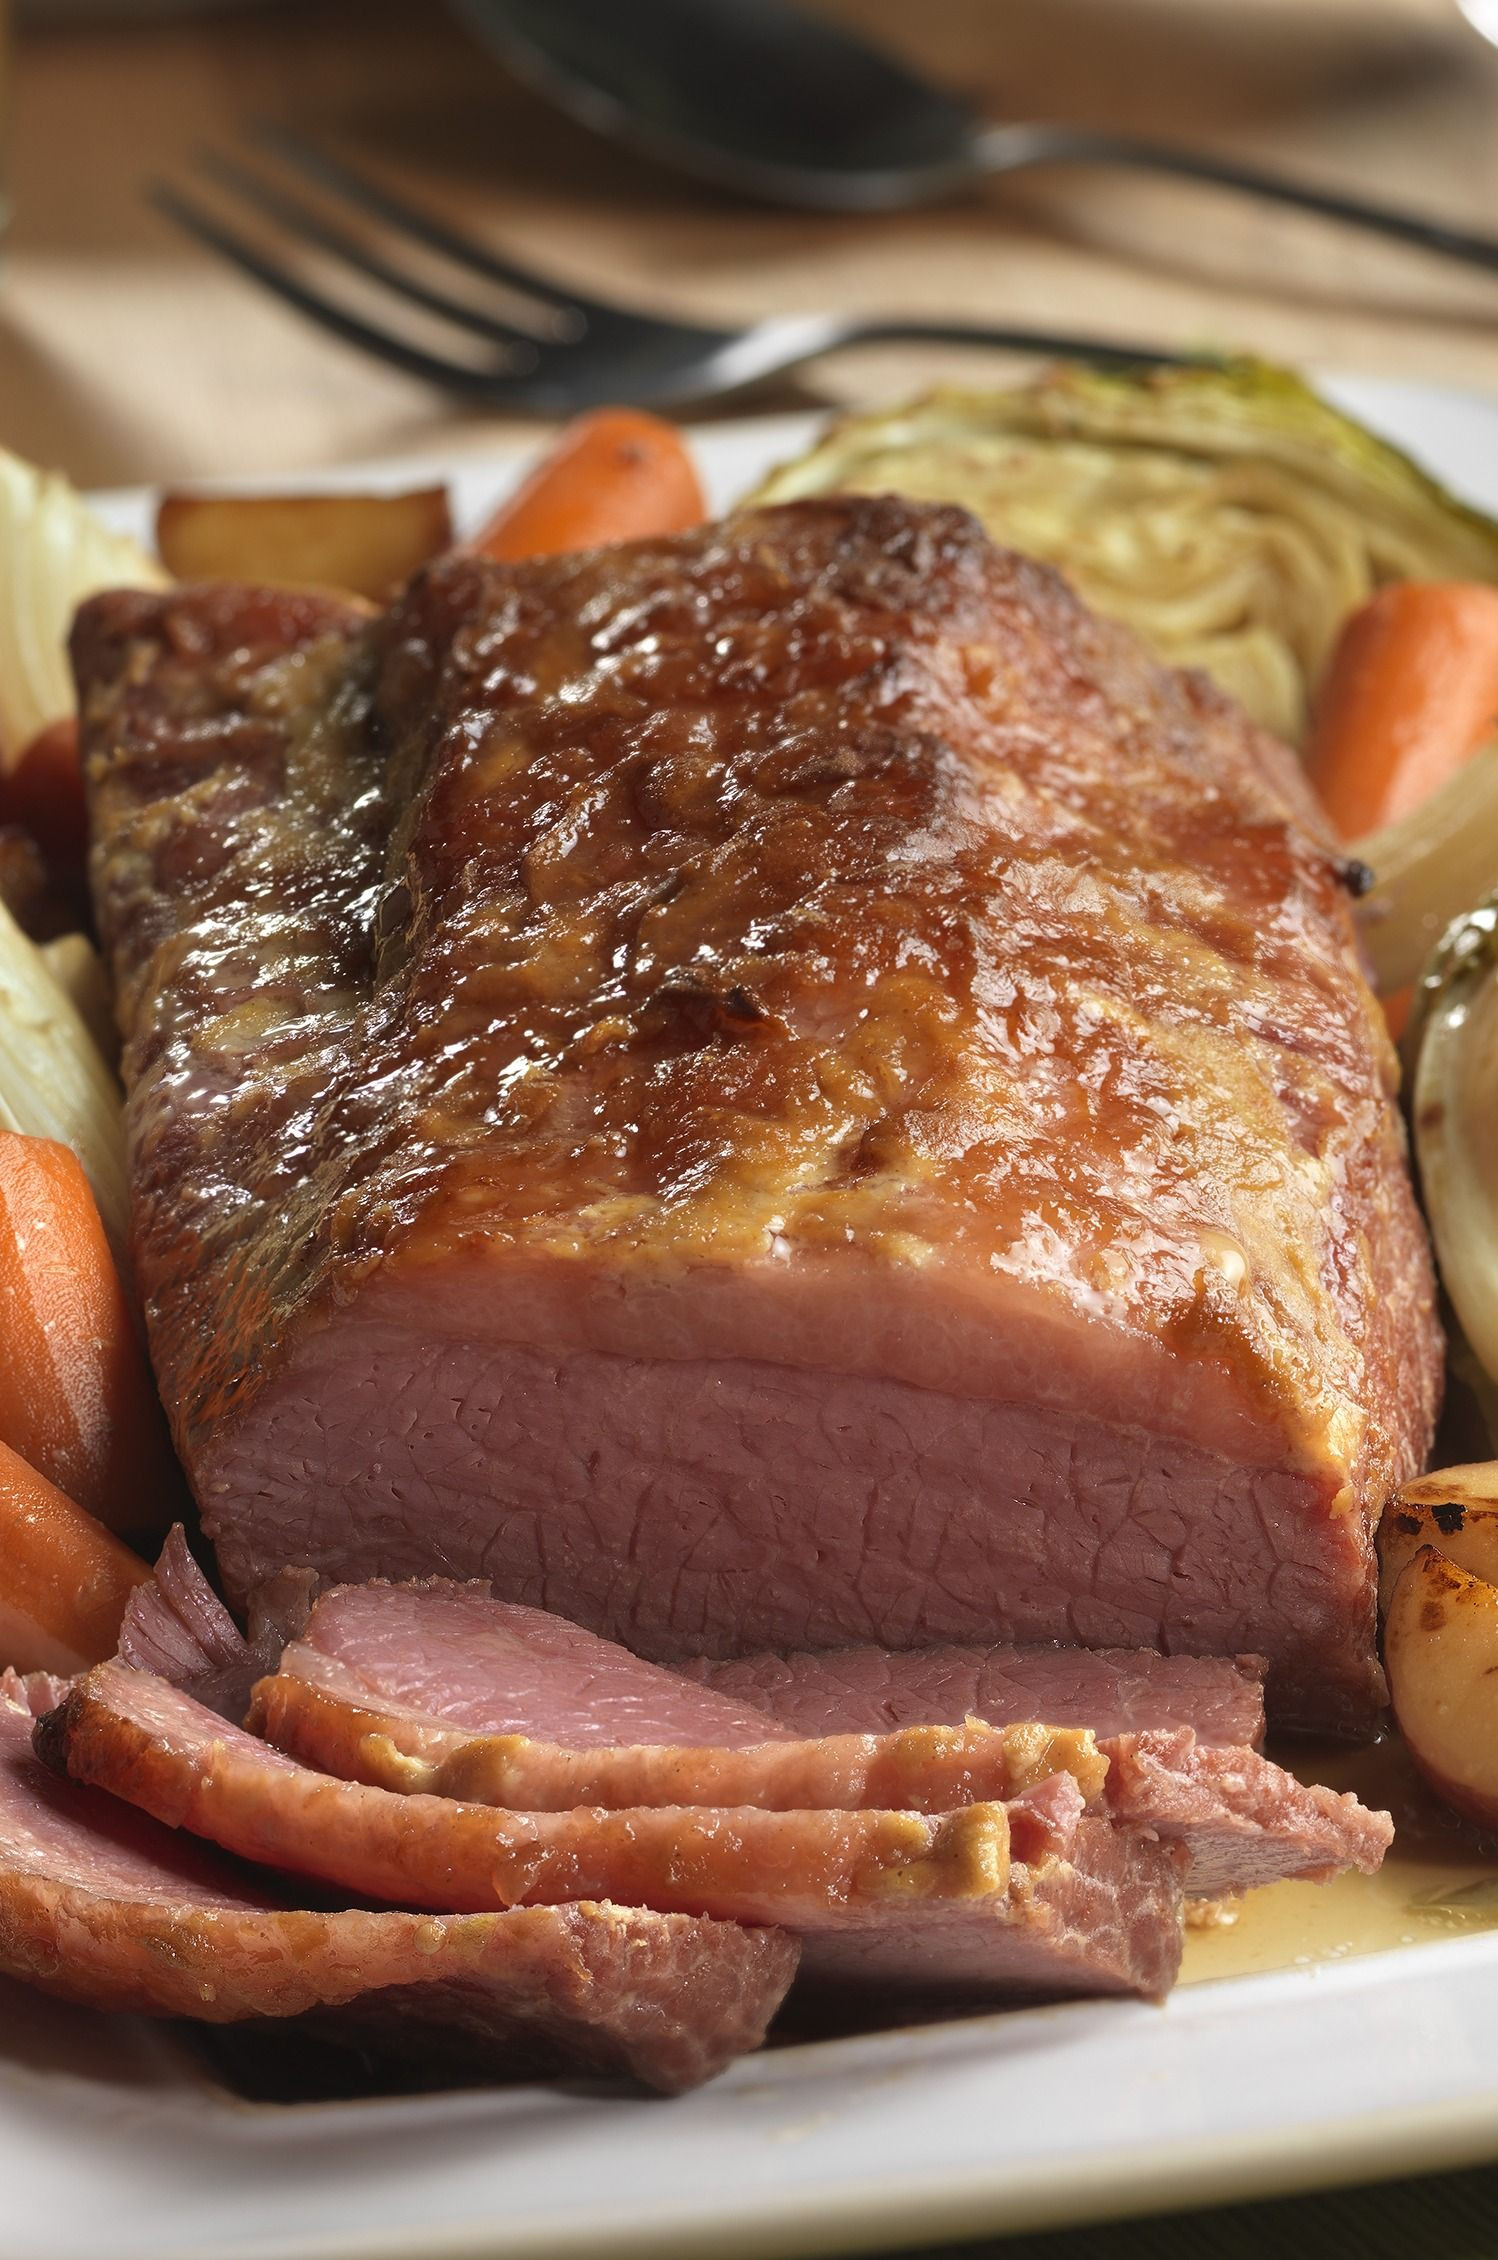 Recipe For Corned Beef And Cabbage In The Oven
 Oven Braised Corned Beef & Cabbage Recipe